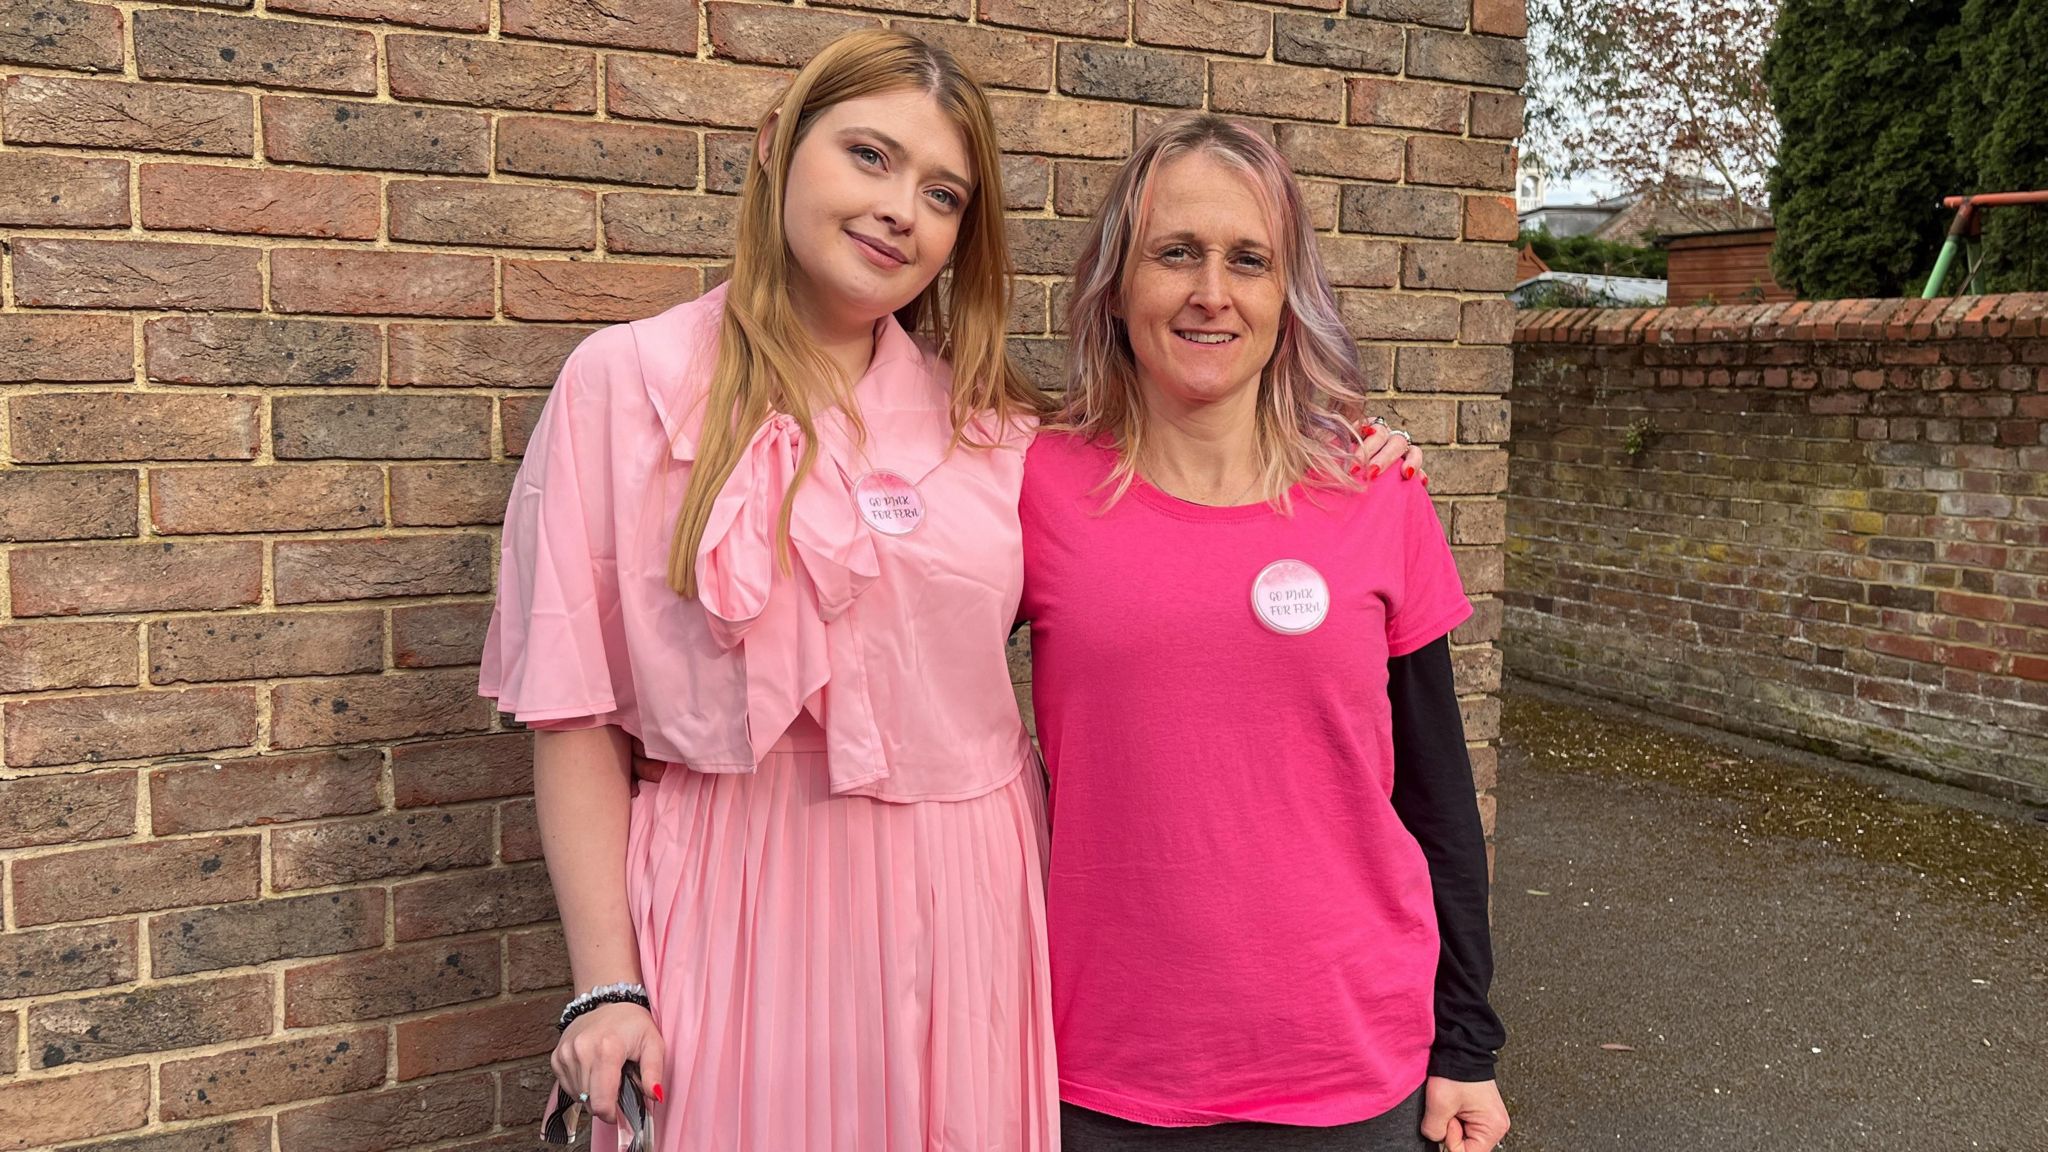 Rowan and her mum dressed in pink and smiling